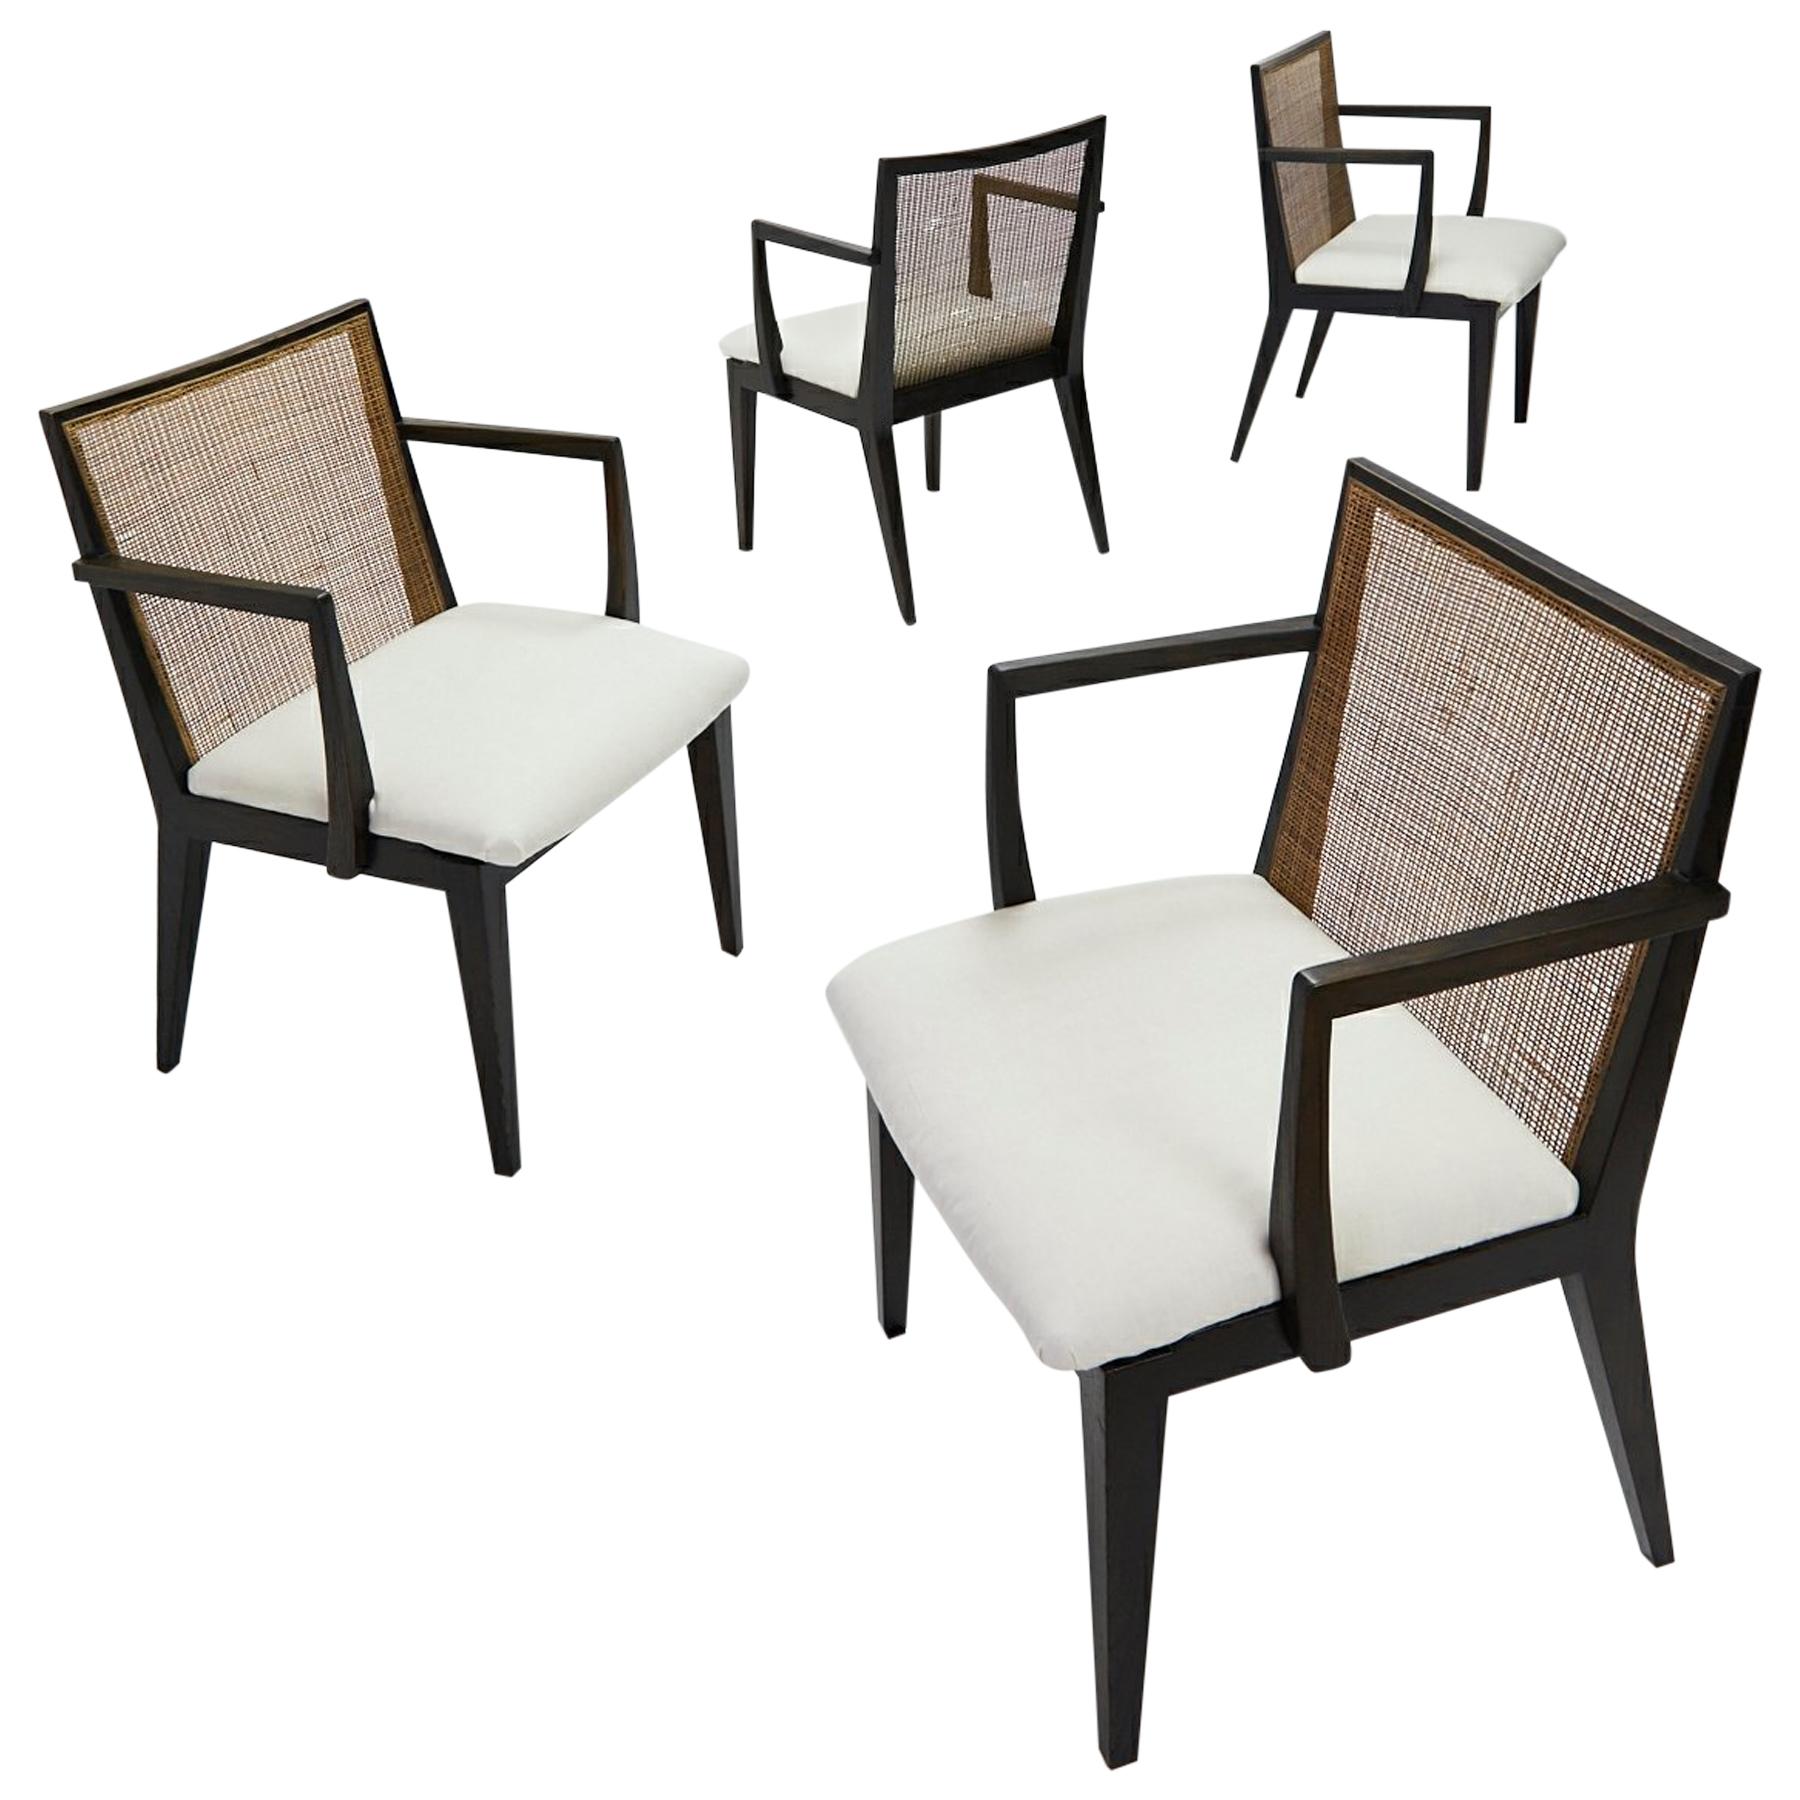 Set of Four Armchairs by Edward Wormley for Dunbar, ca. 1959